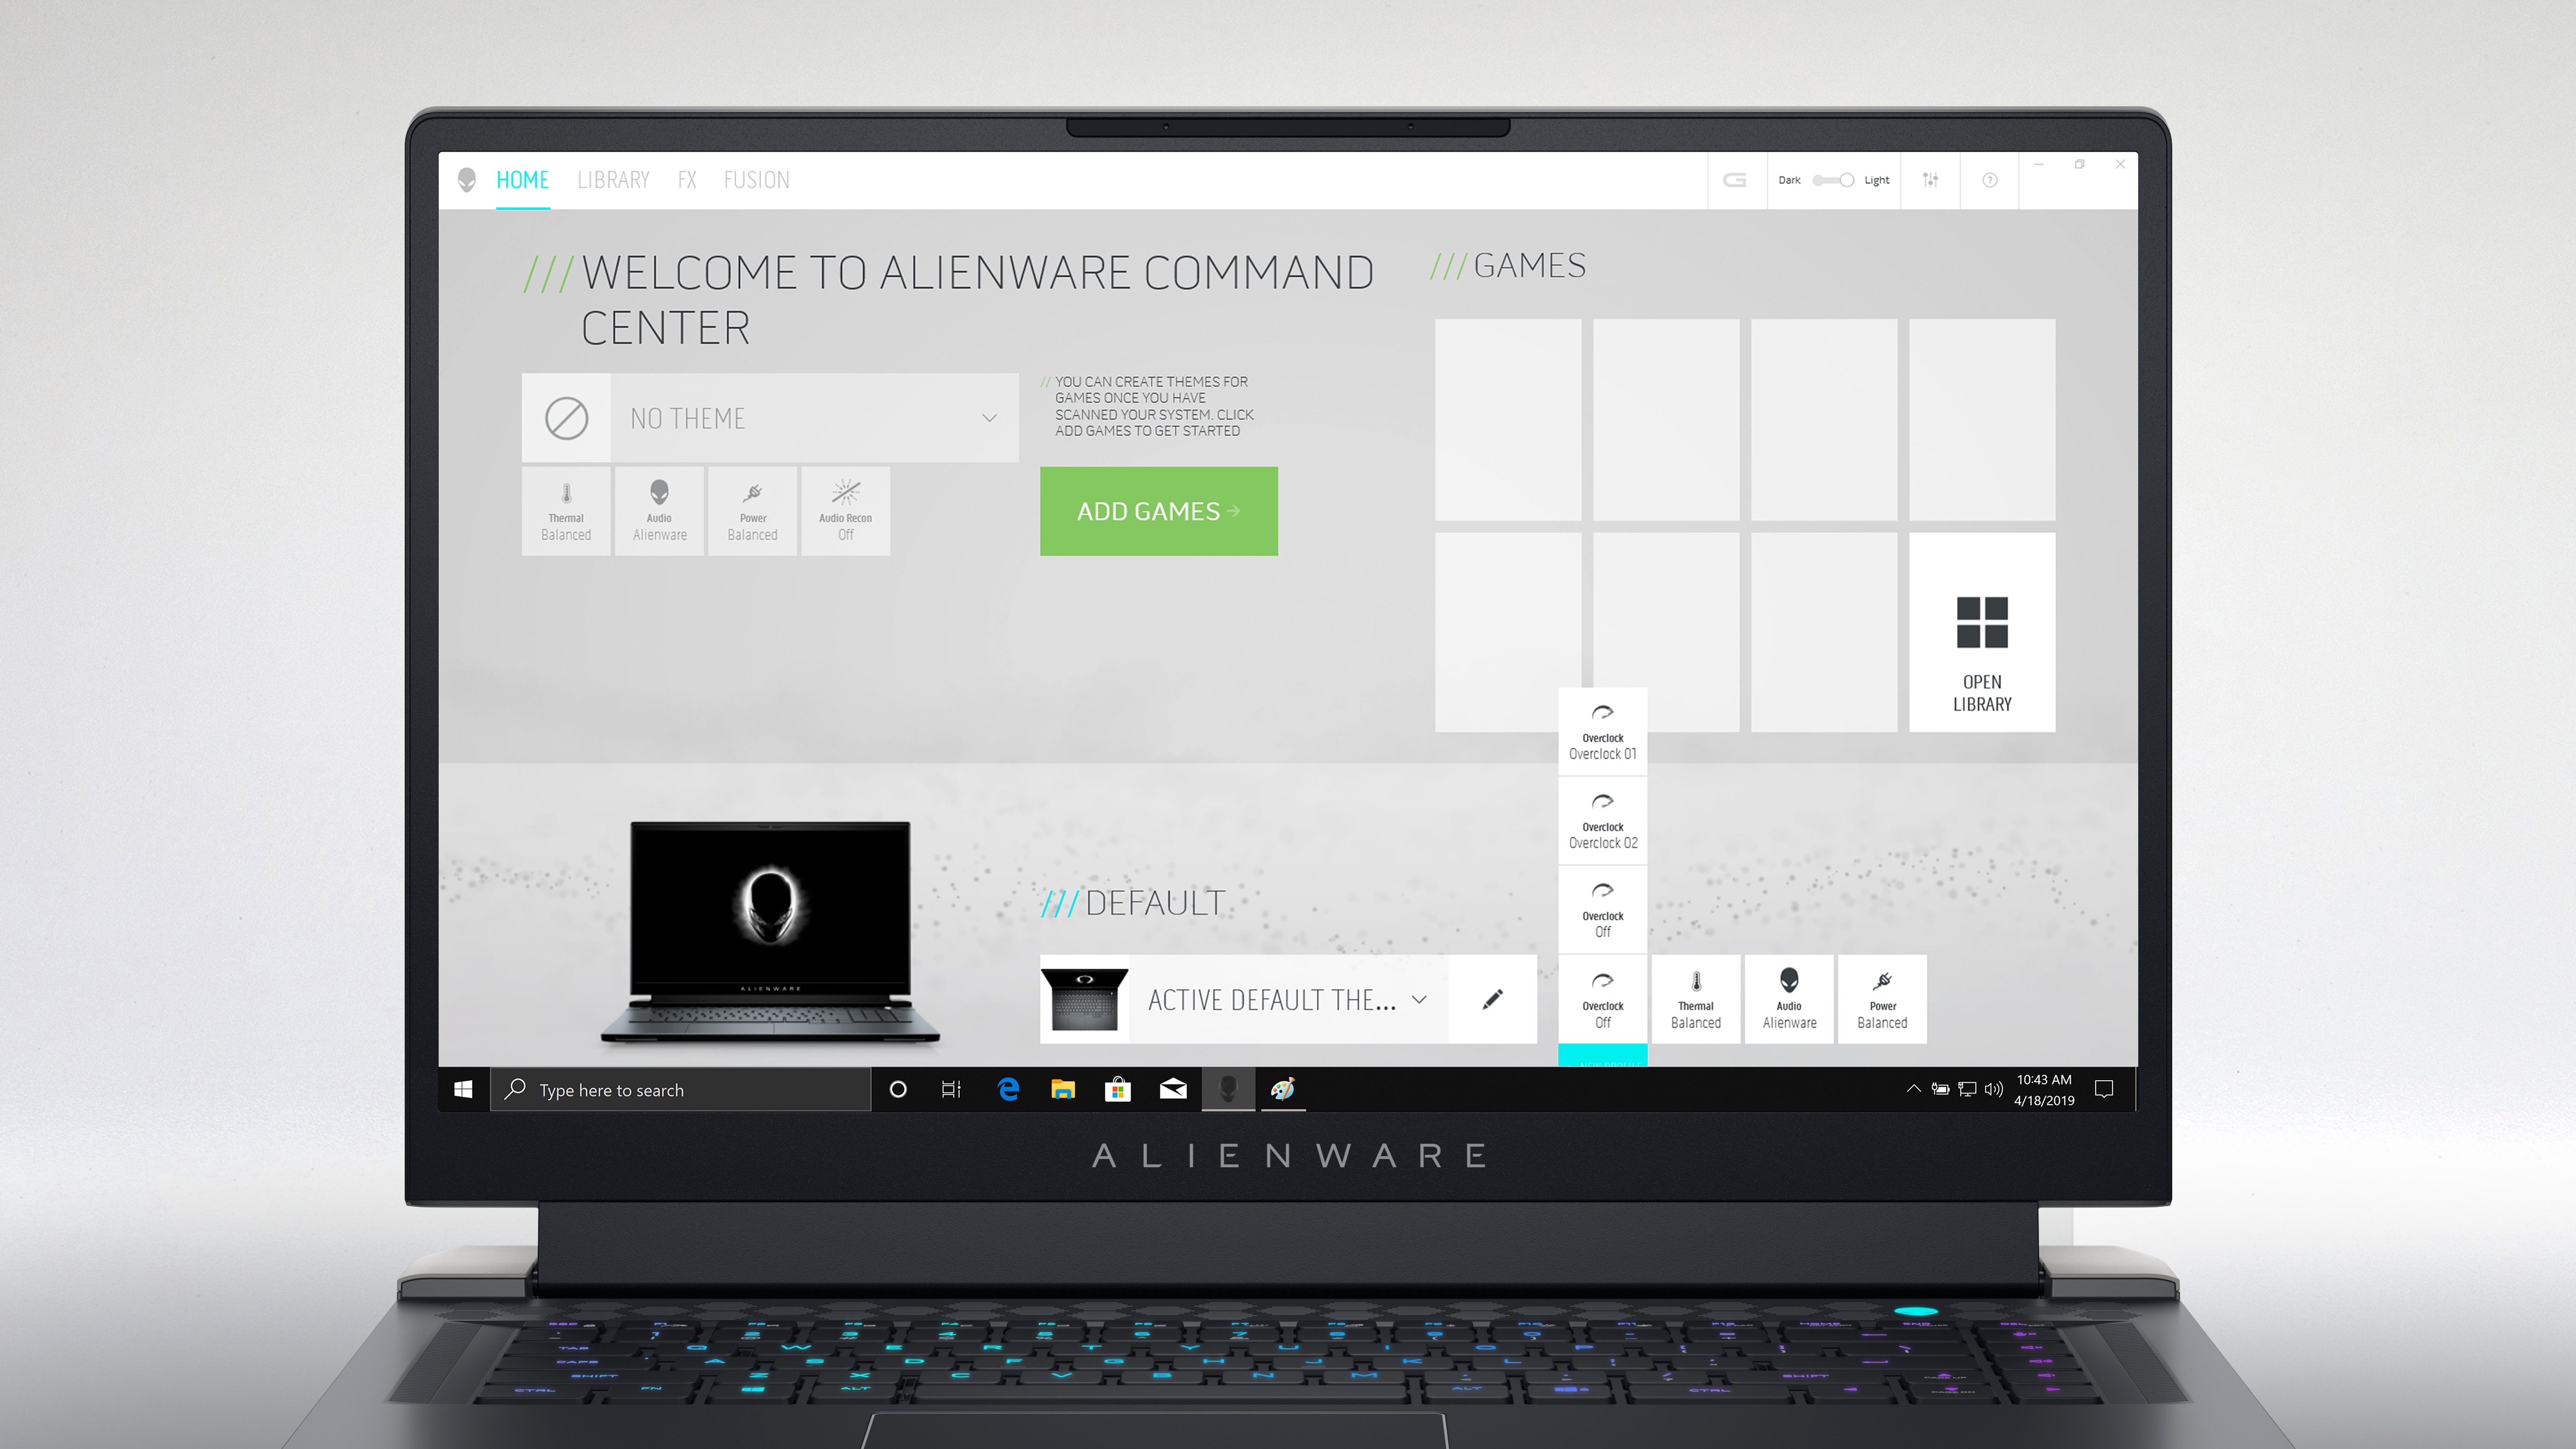 Picture of Dell Alienware x15 R2 Gaming Laptop with Alienware Command Center homepage on the screen.